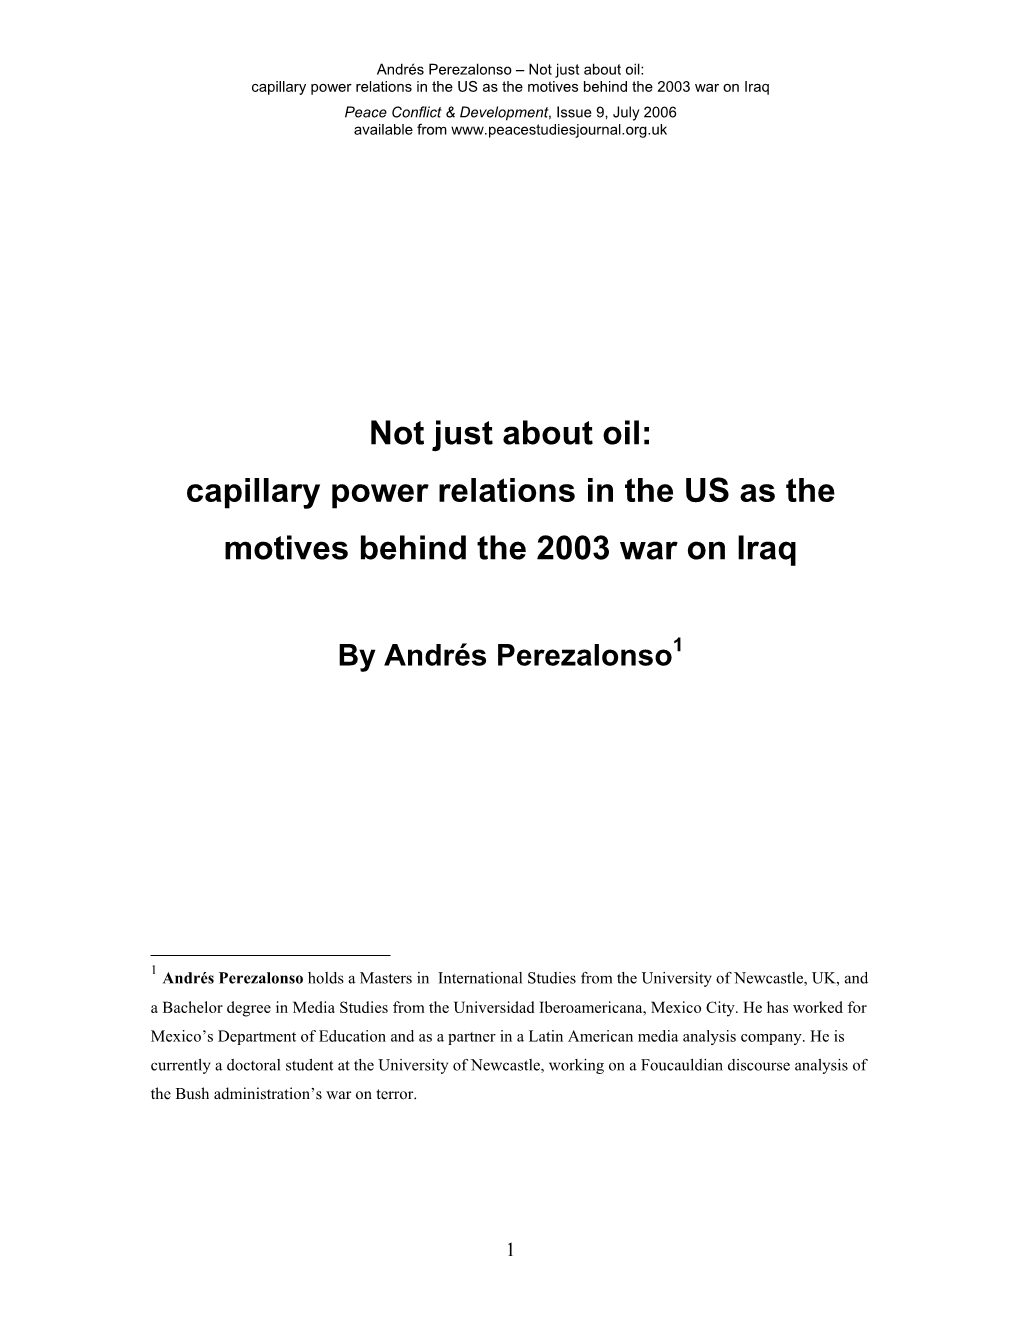 Not Just About Oil: Power Relations As Reasons for the War on I